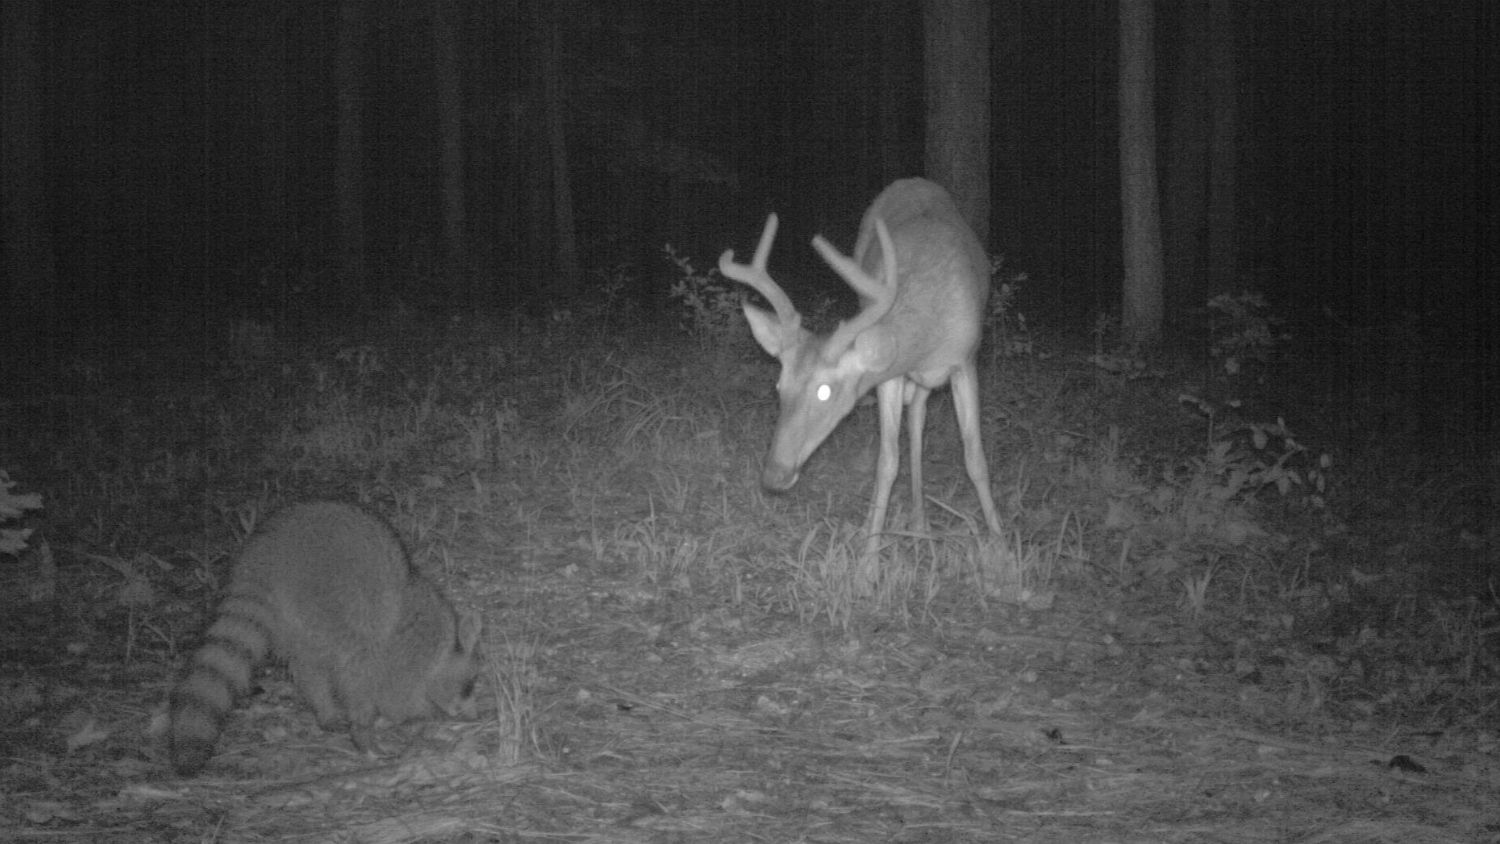 Raccoon and deer foraging together.